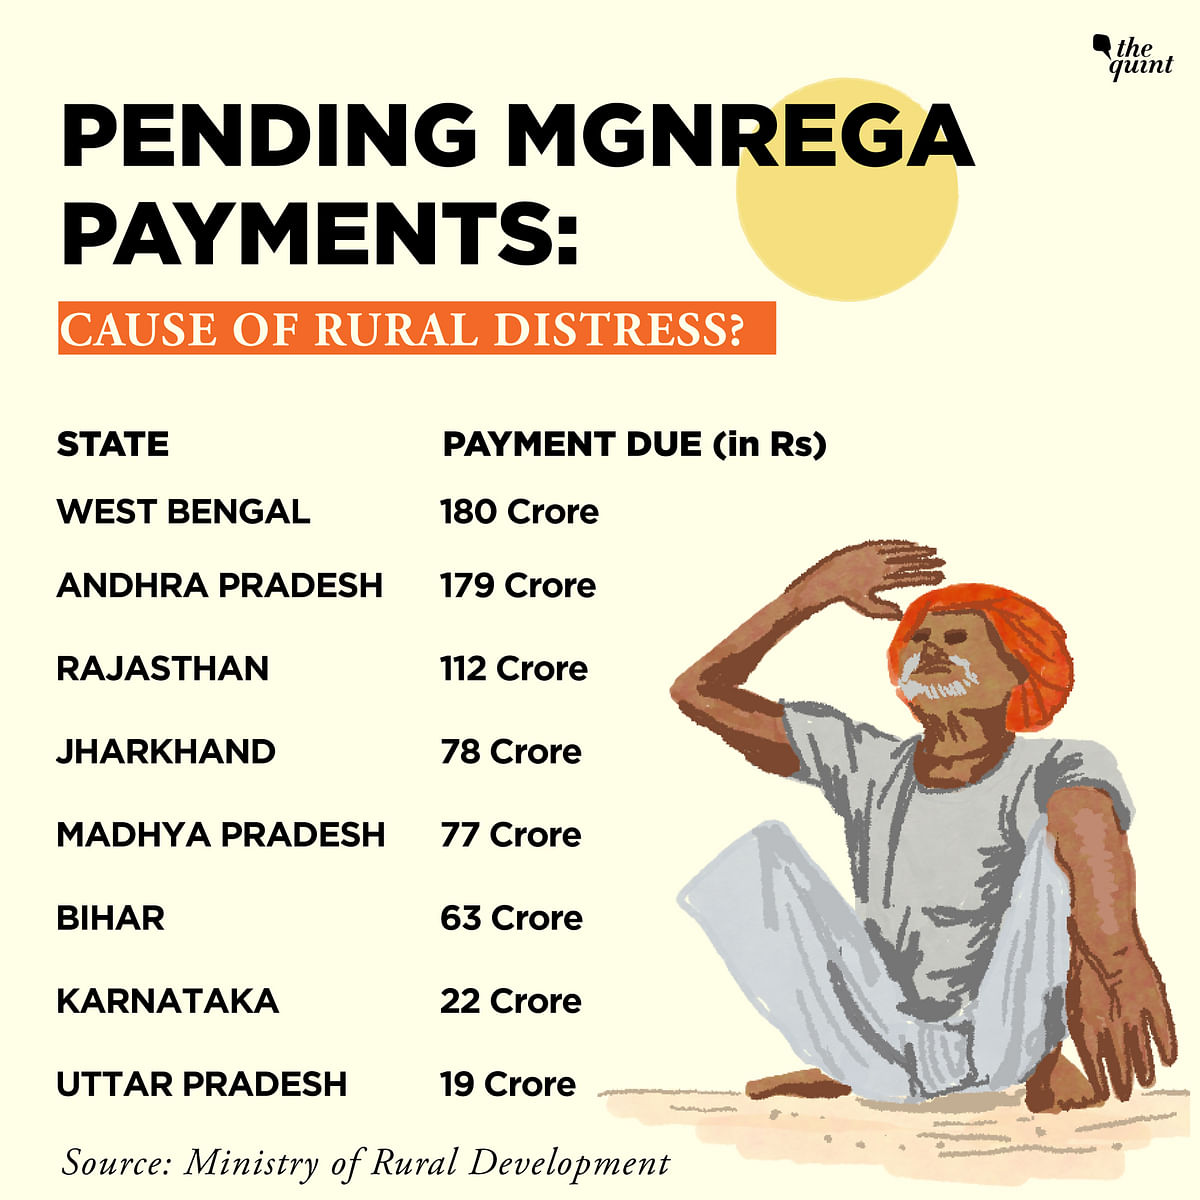 Delay in MGNREGA payment pushed a farmer to kill himself, but officials are busy questioning if it was an accident.